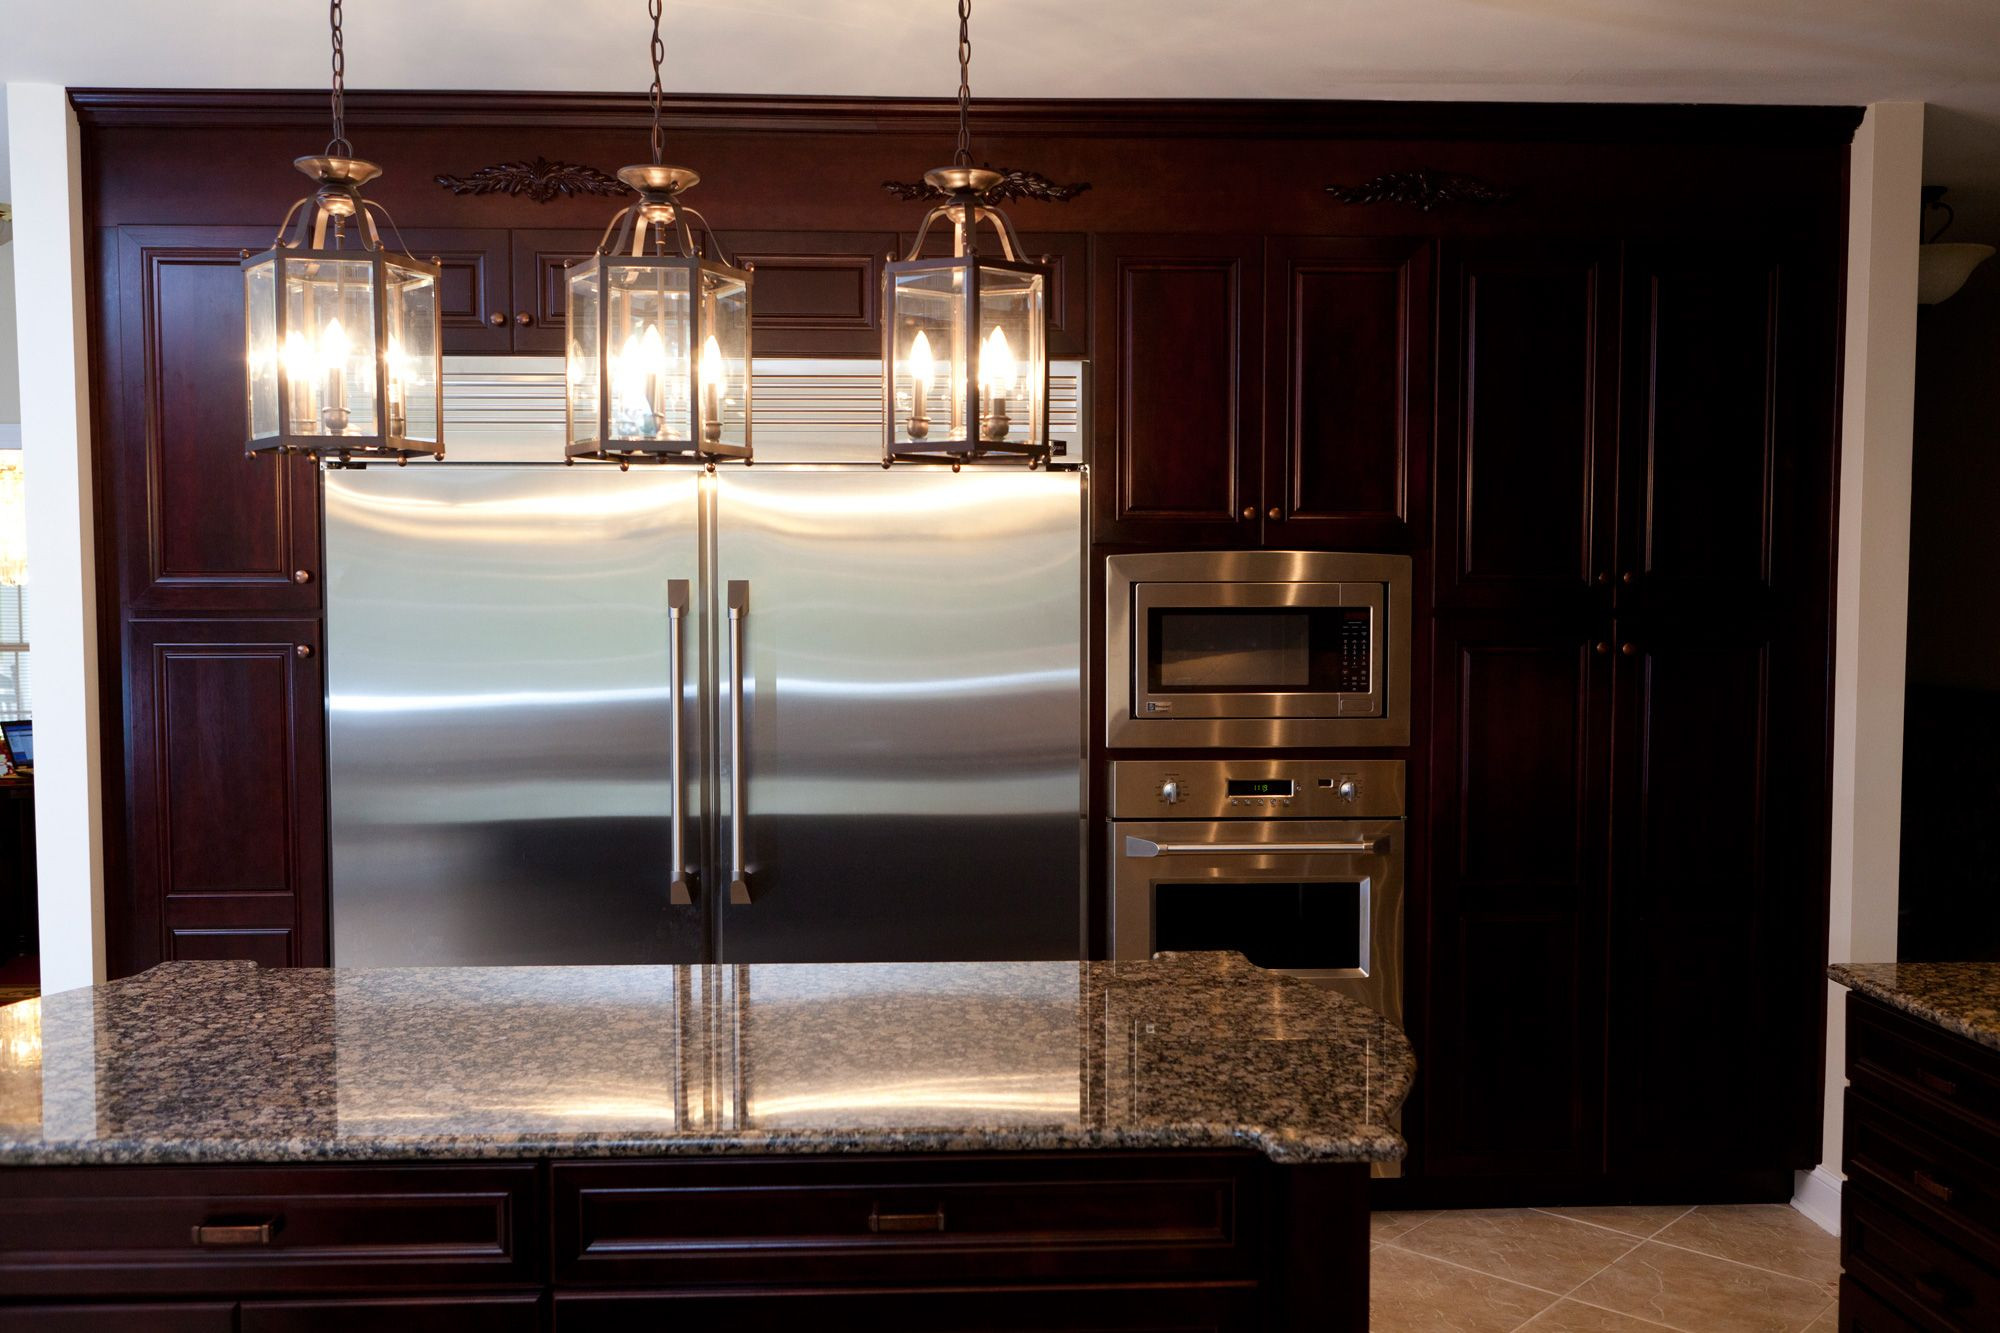 Lowes Kitchen Lights Over Sink
 Over The Kitchen Sink Light Fixtures Lowes